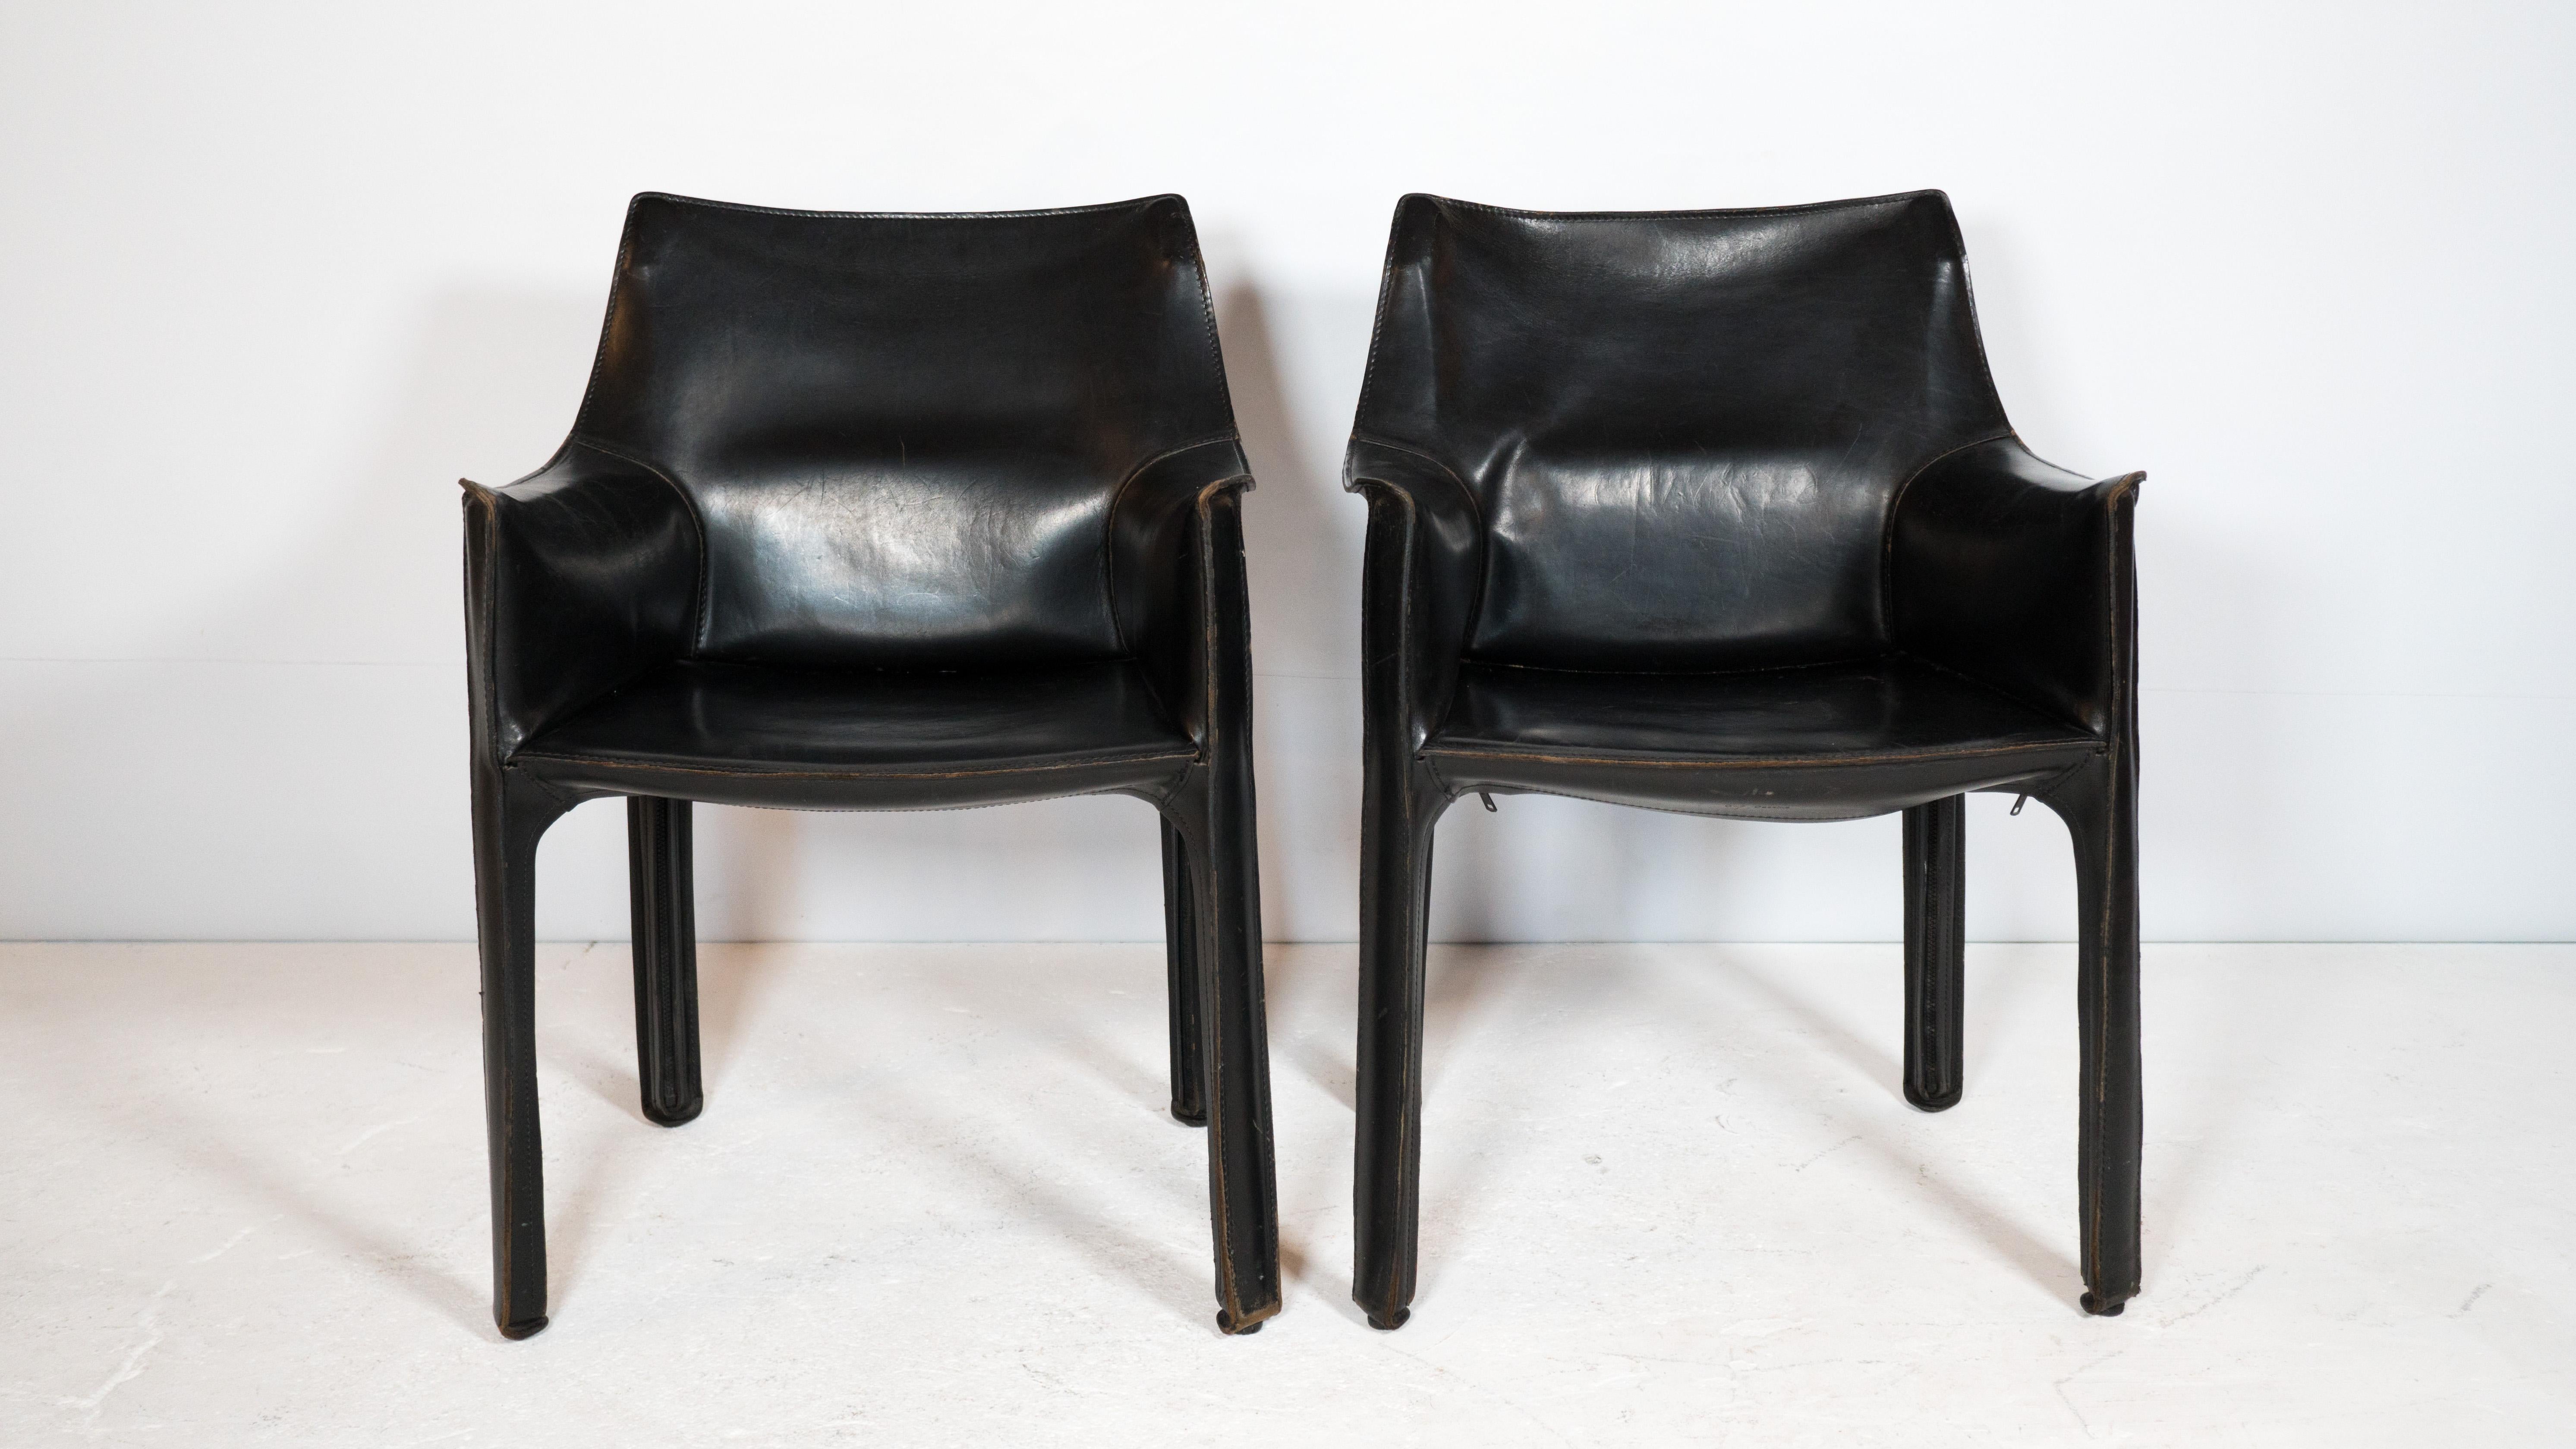 Mario Bellini '413 Cab' armchairs for Cassina, circa 1980s. Presented in black leather with exposed stitching details. The cowhide leather wraps around all sides of the steel frame, influenced by the human body and how skin wraps around one's